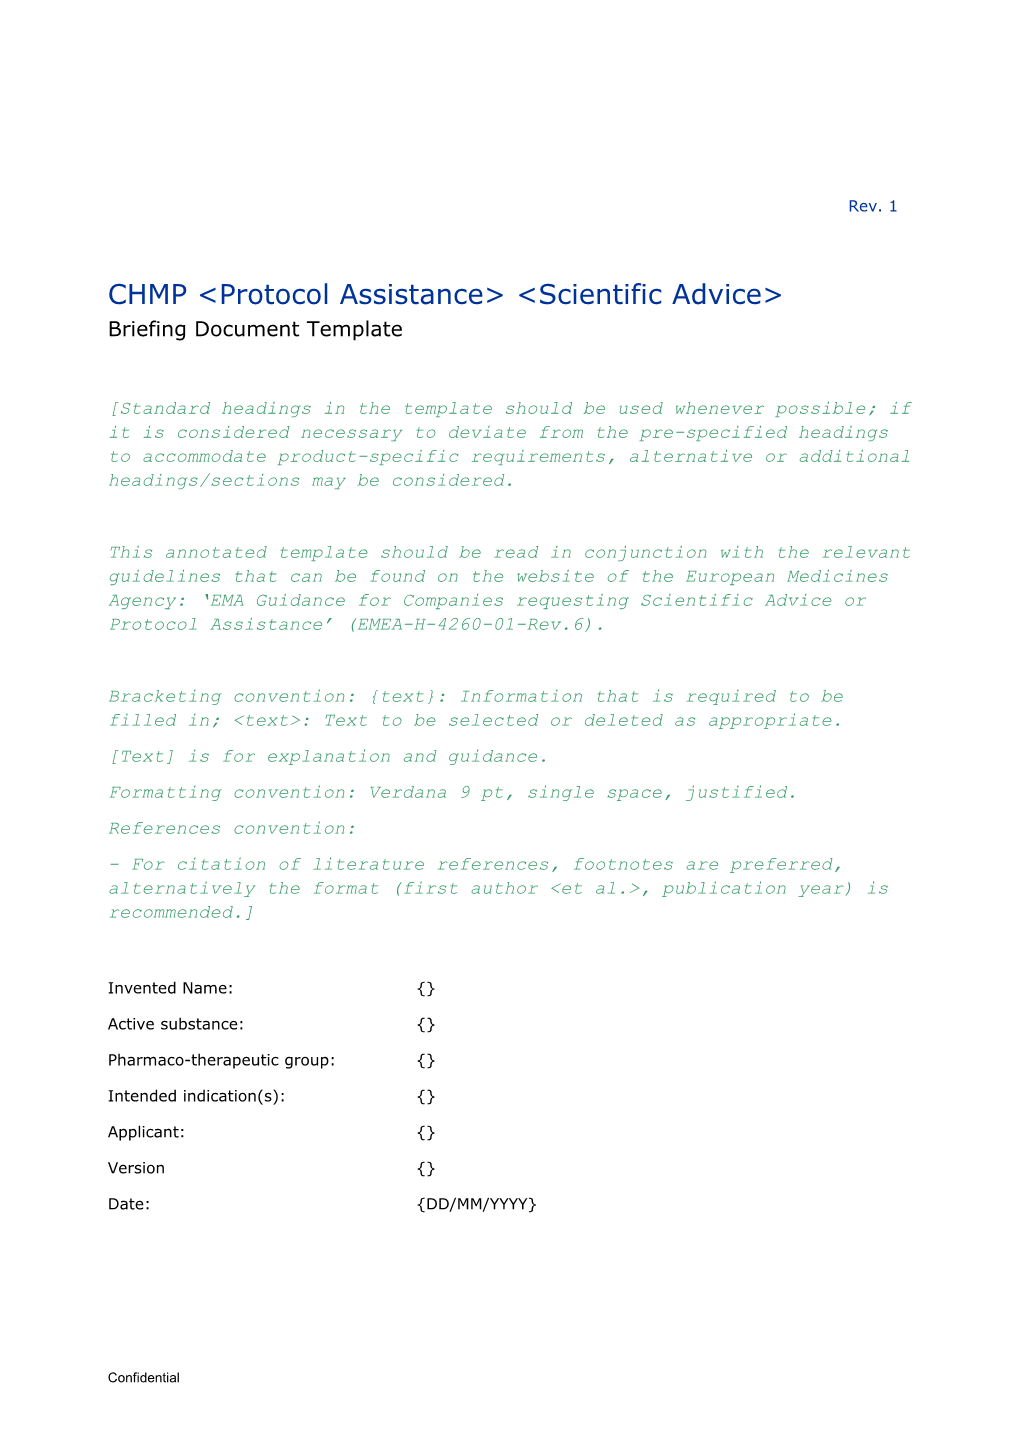 CHMP Protocol Assistance Scientific Advice Briefing Document Template